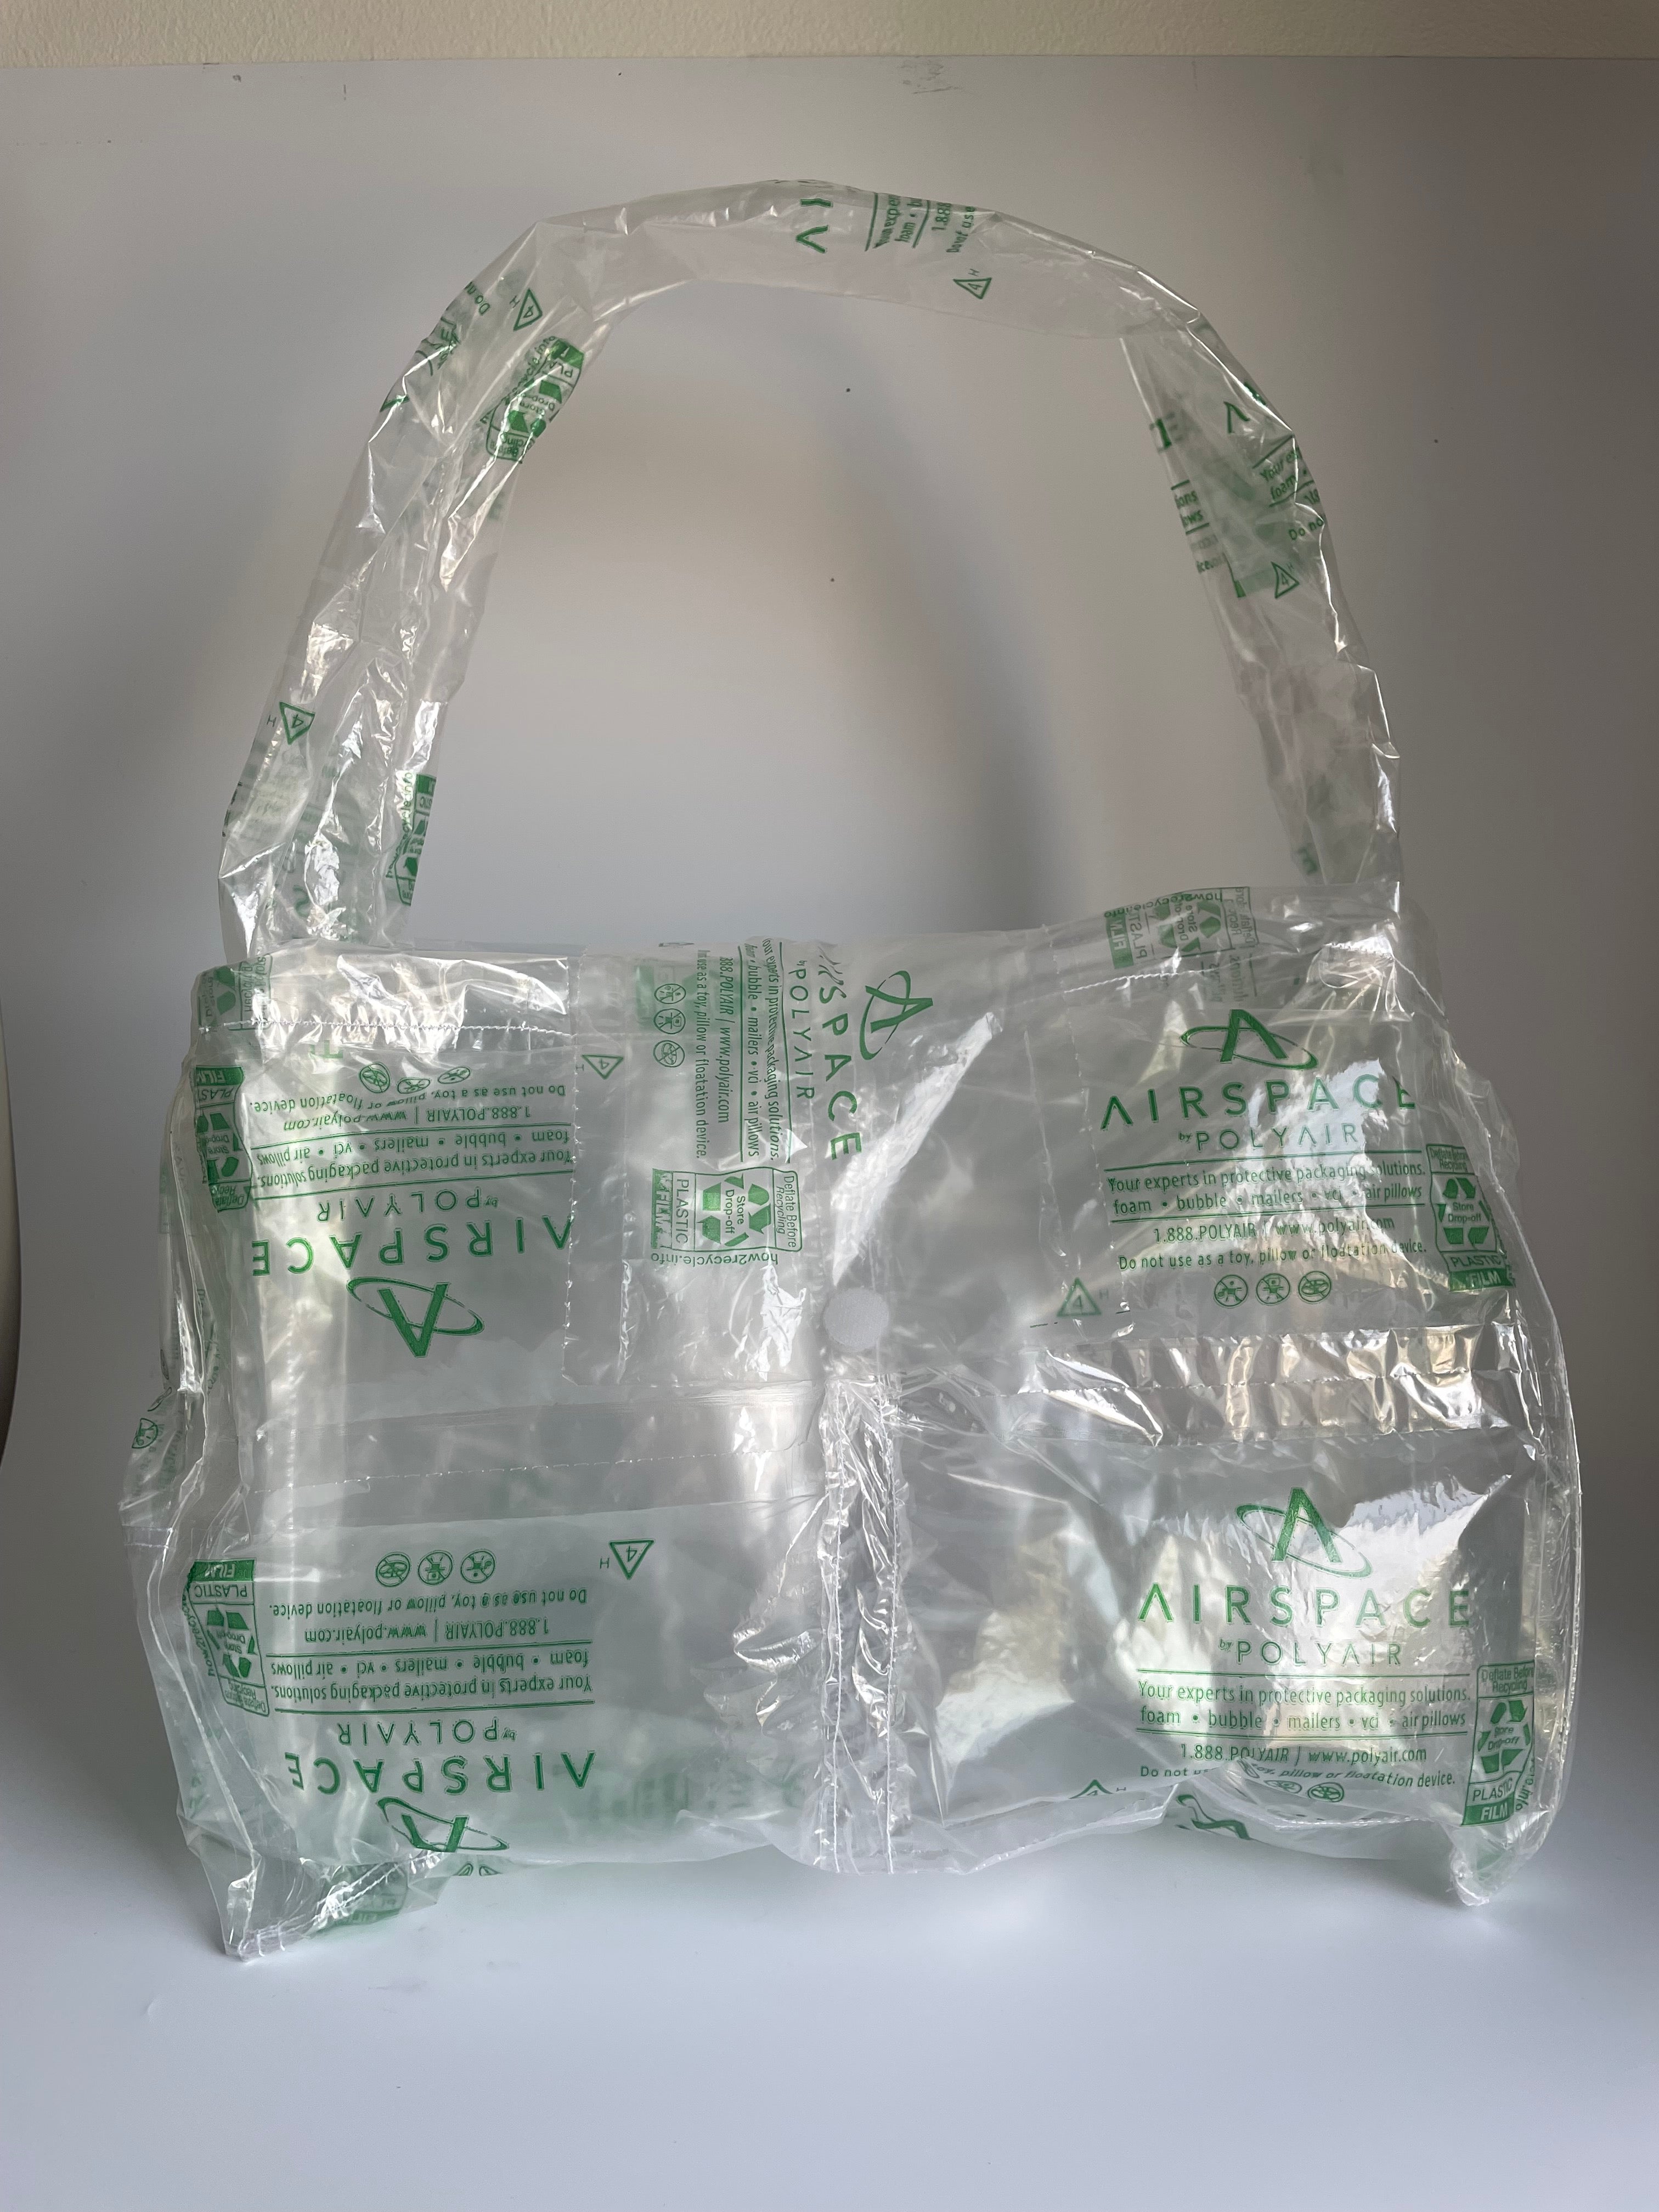 Shoulder bag made of recyclable packaging. Adaptable material reuse objects made to order in New York City by Sera ghadaki. 